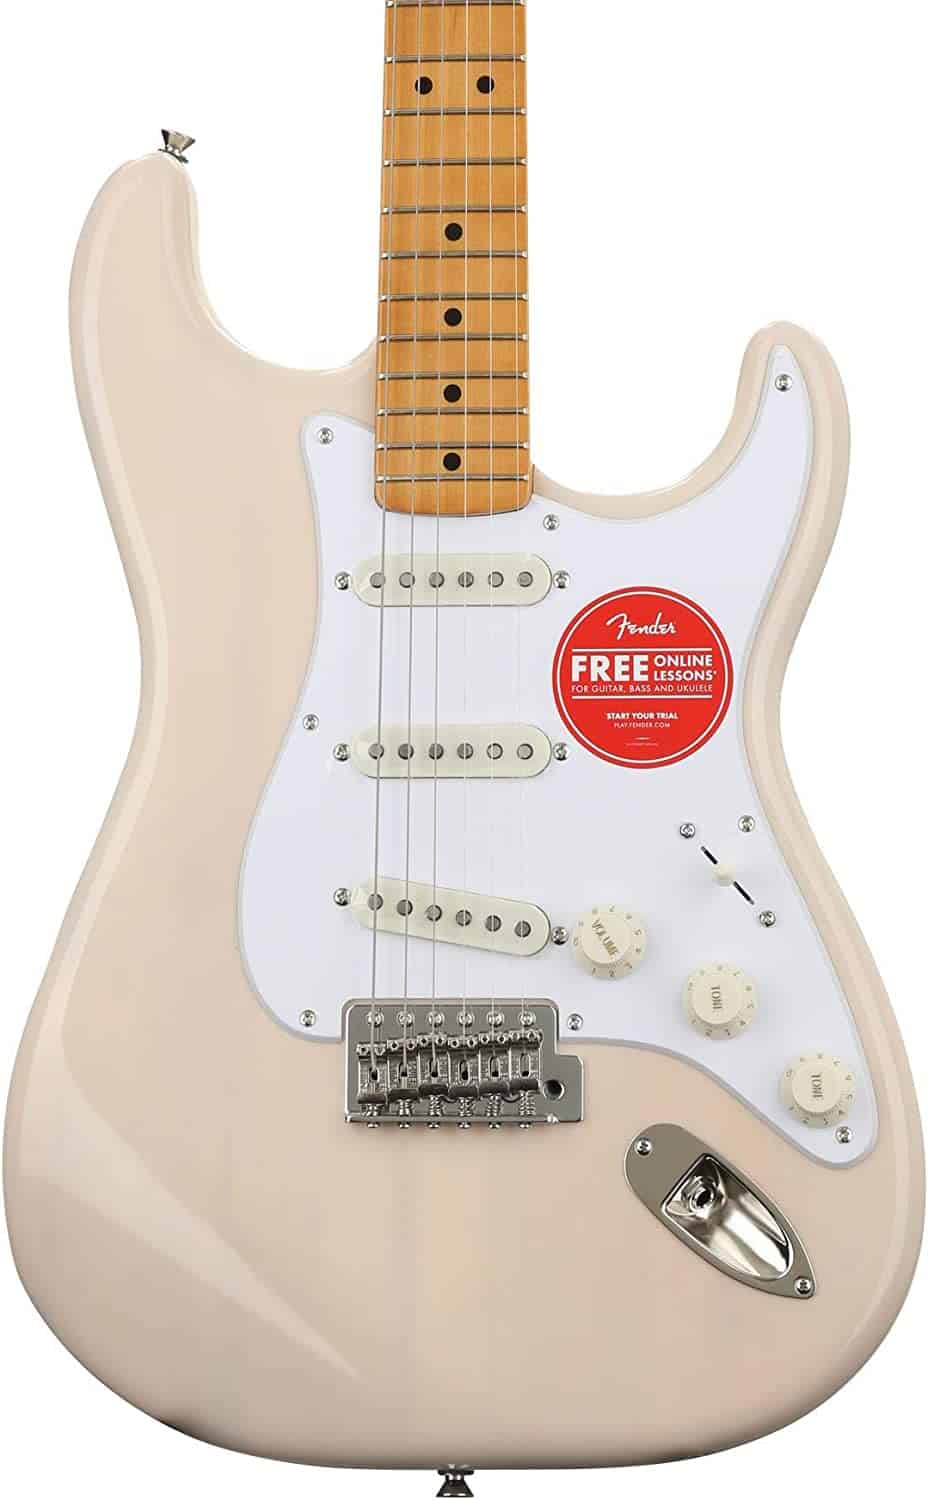 Best Squier guitar for rock- Squier Classic Vibe 50s Stratocaster